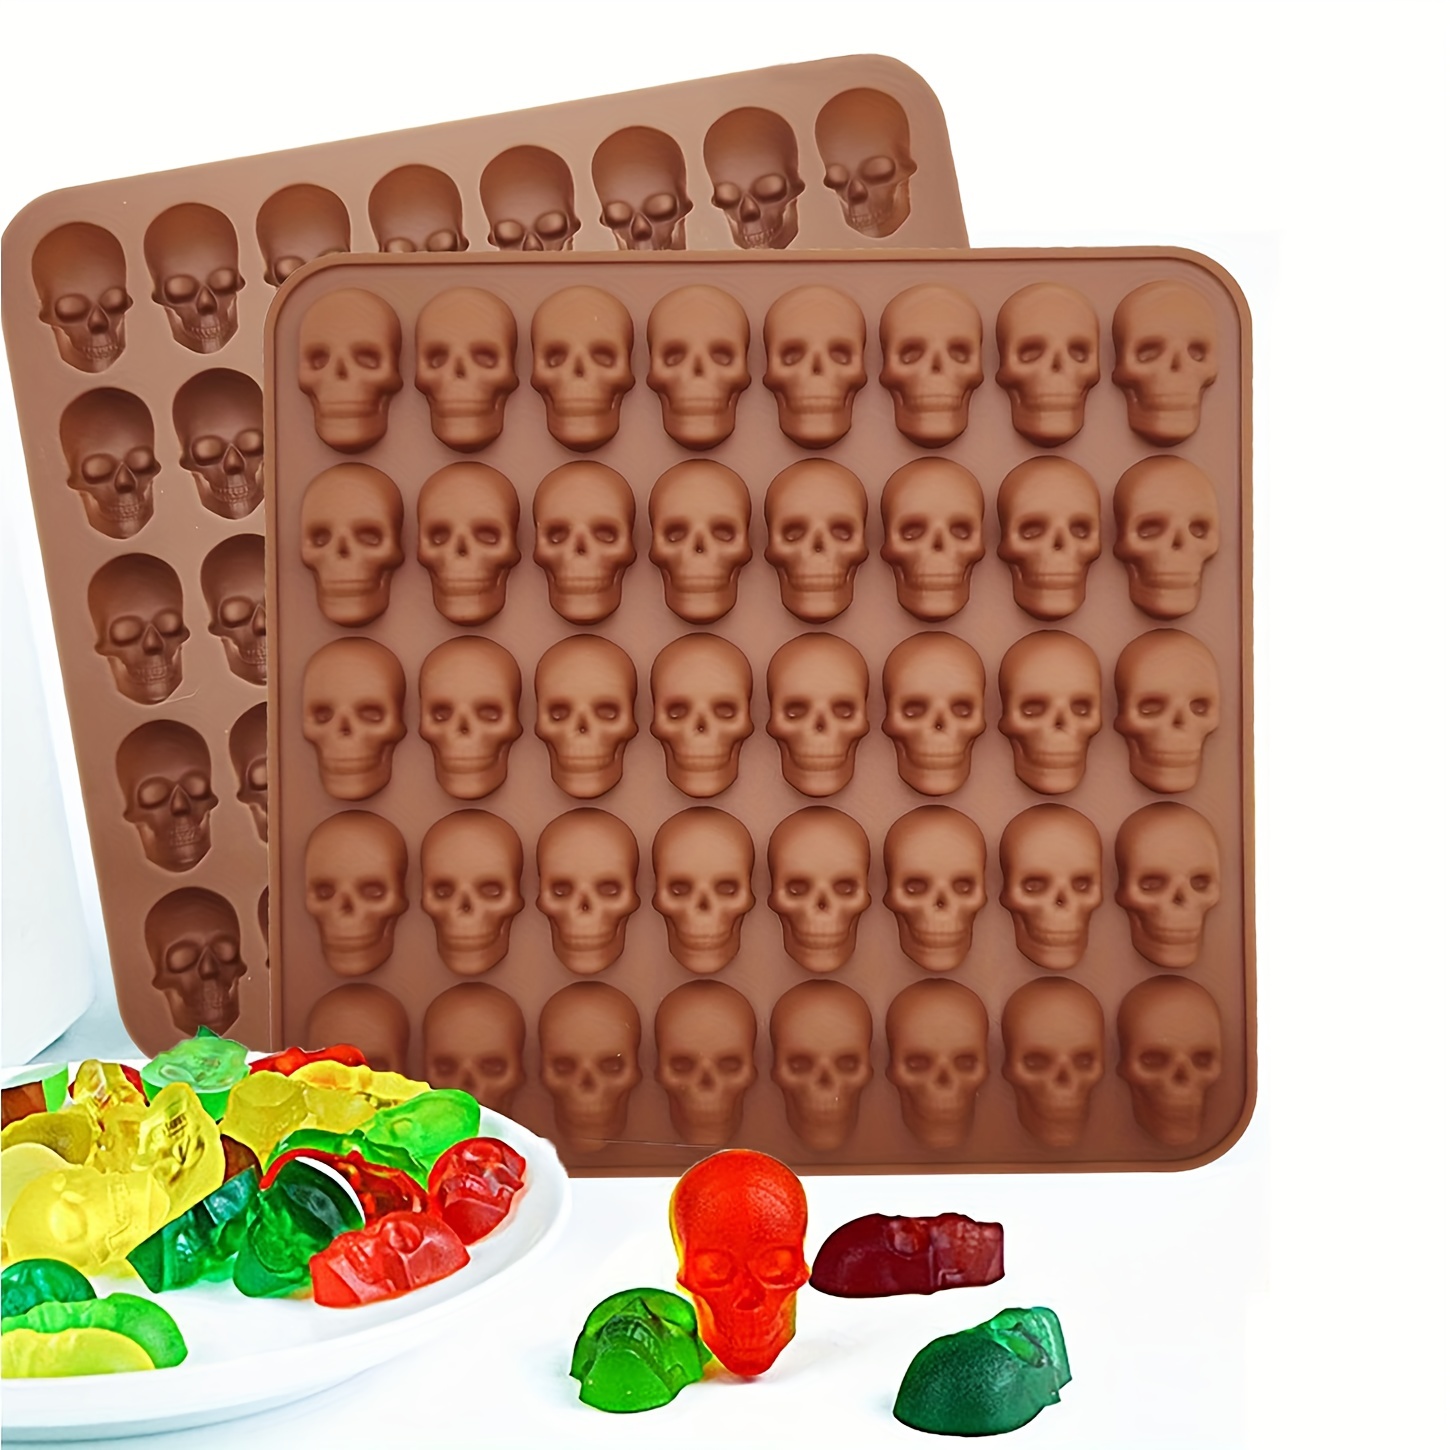 1pc Reusable Gummy Skull Candy Mold Mini Skull Silicone Mold Chocolate Mold  For Making Candy Chocolate Halloween Party Decor Day Of The Dead Decor